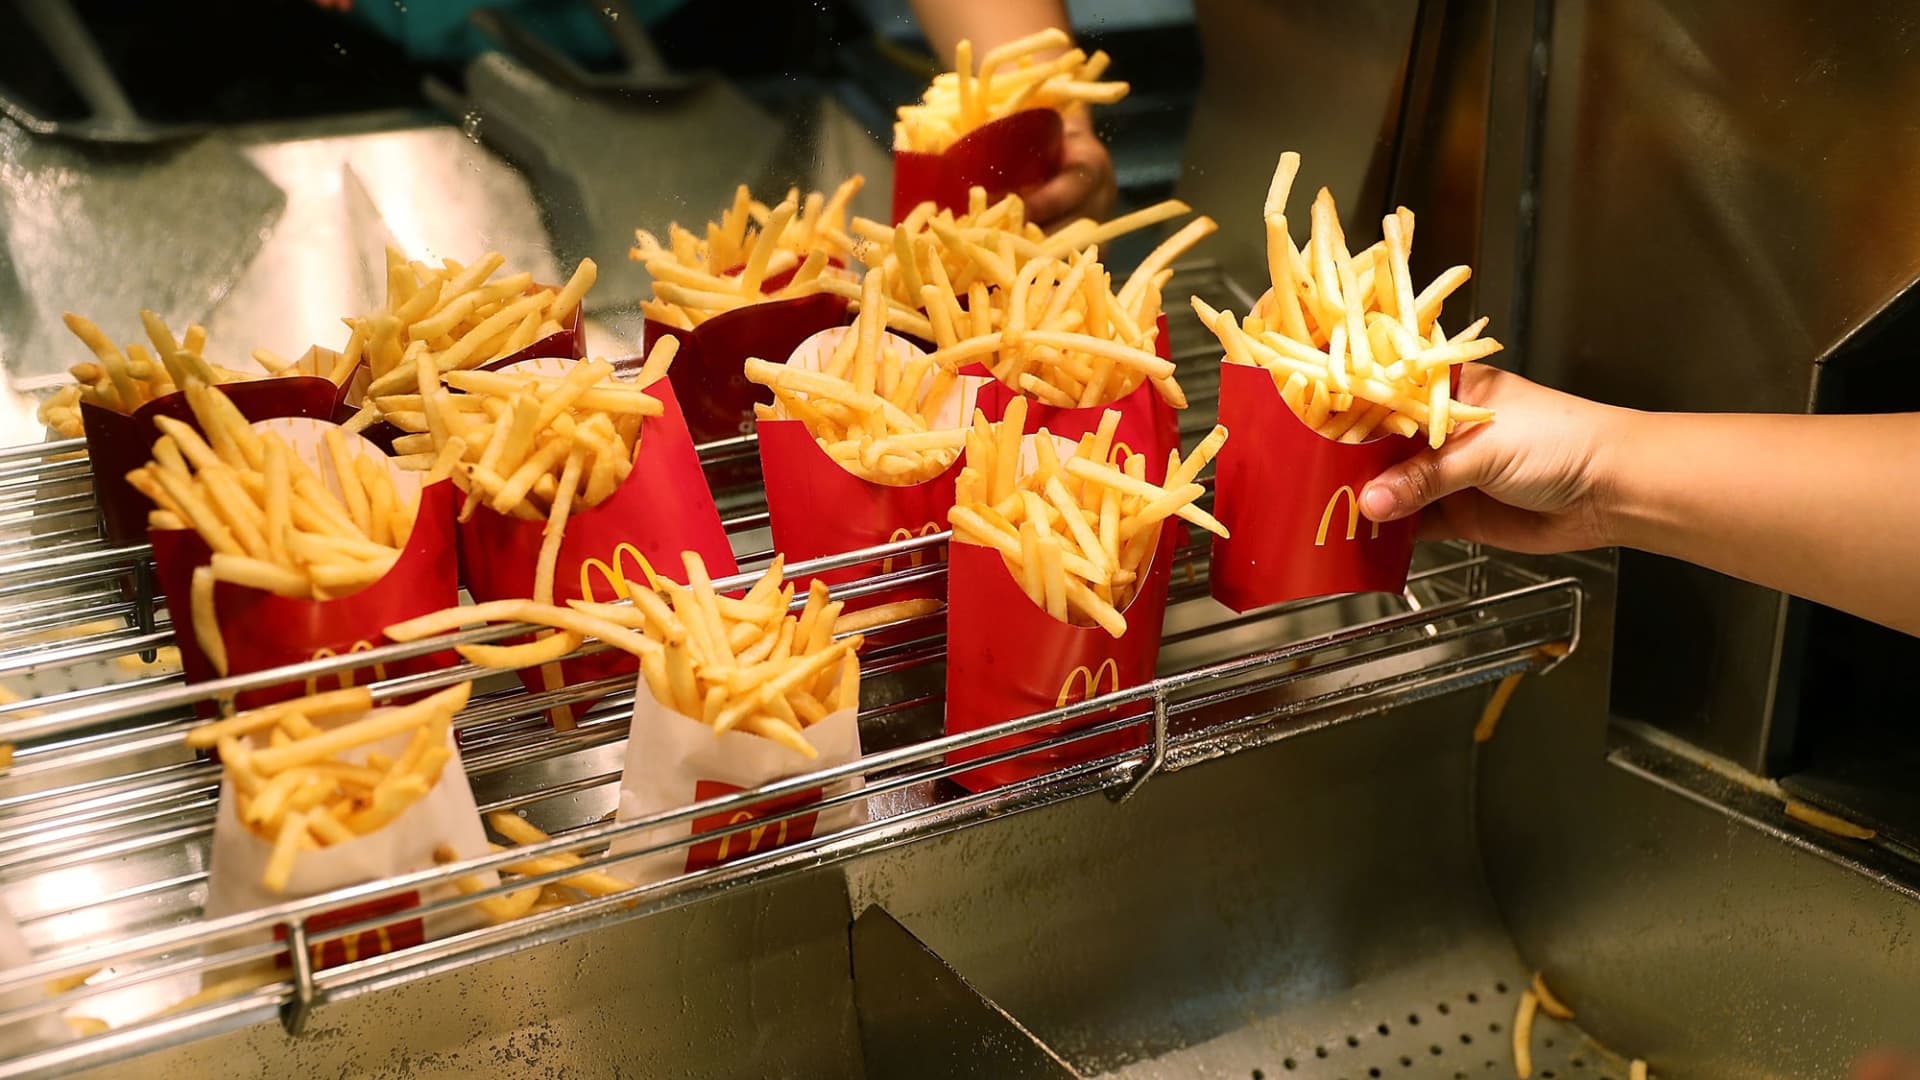 Desire for french fries displays resilient consumer as so-called fry attachment level holds continuous